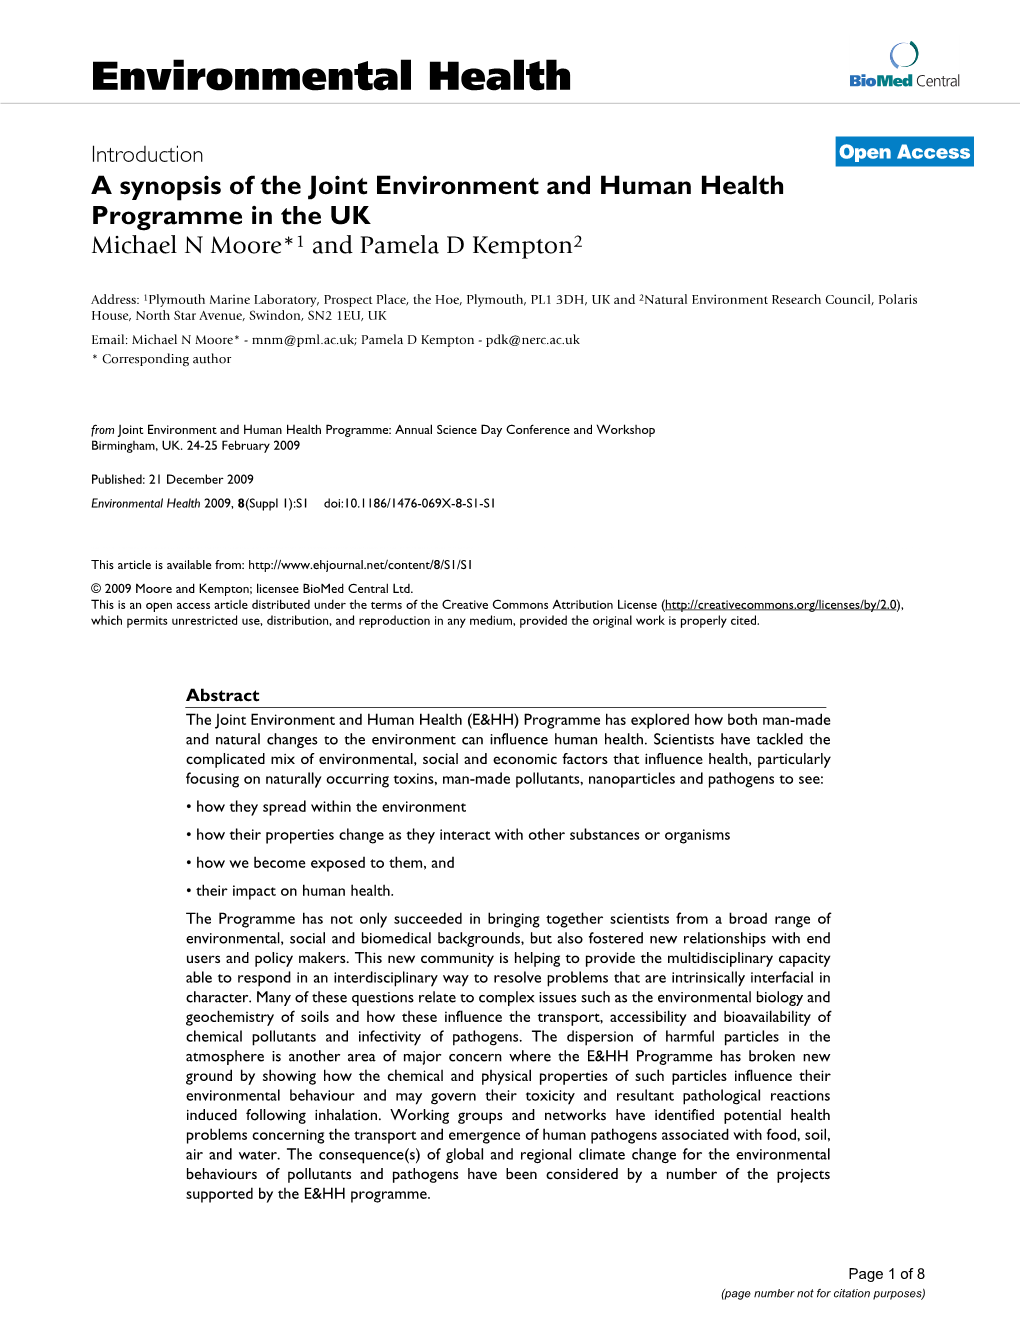 A Synopsis of the Joint Environment and Human Health Programme in the UK Michael N Moore*1 and Pamela D Kempton2